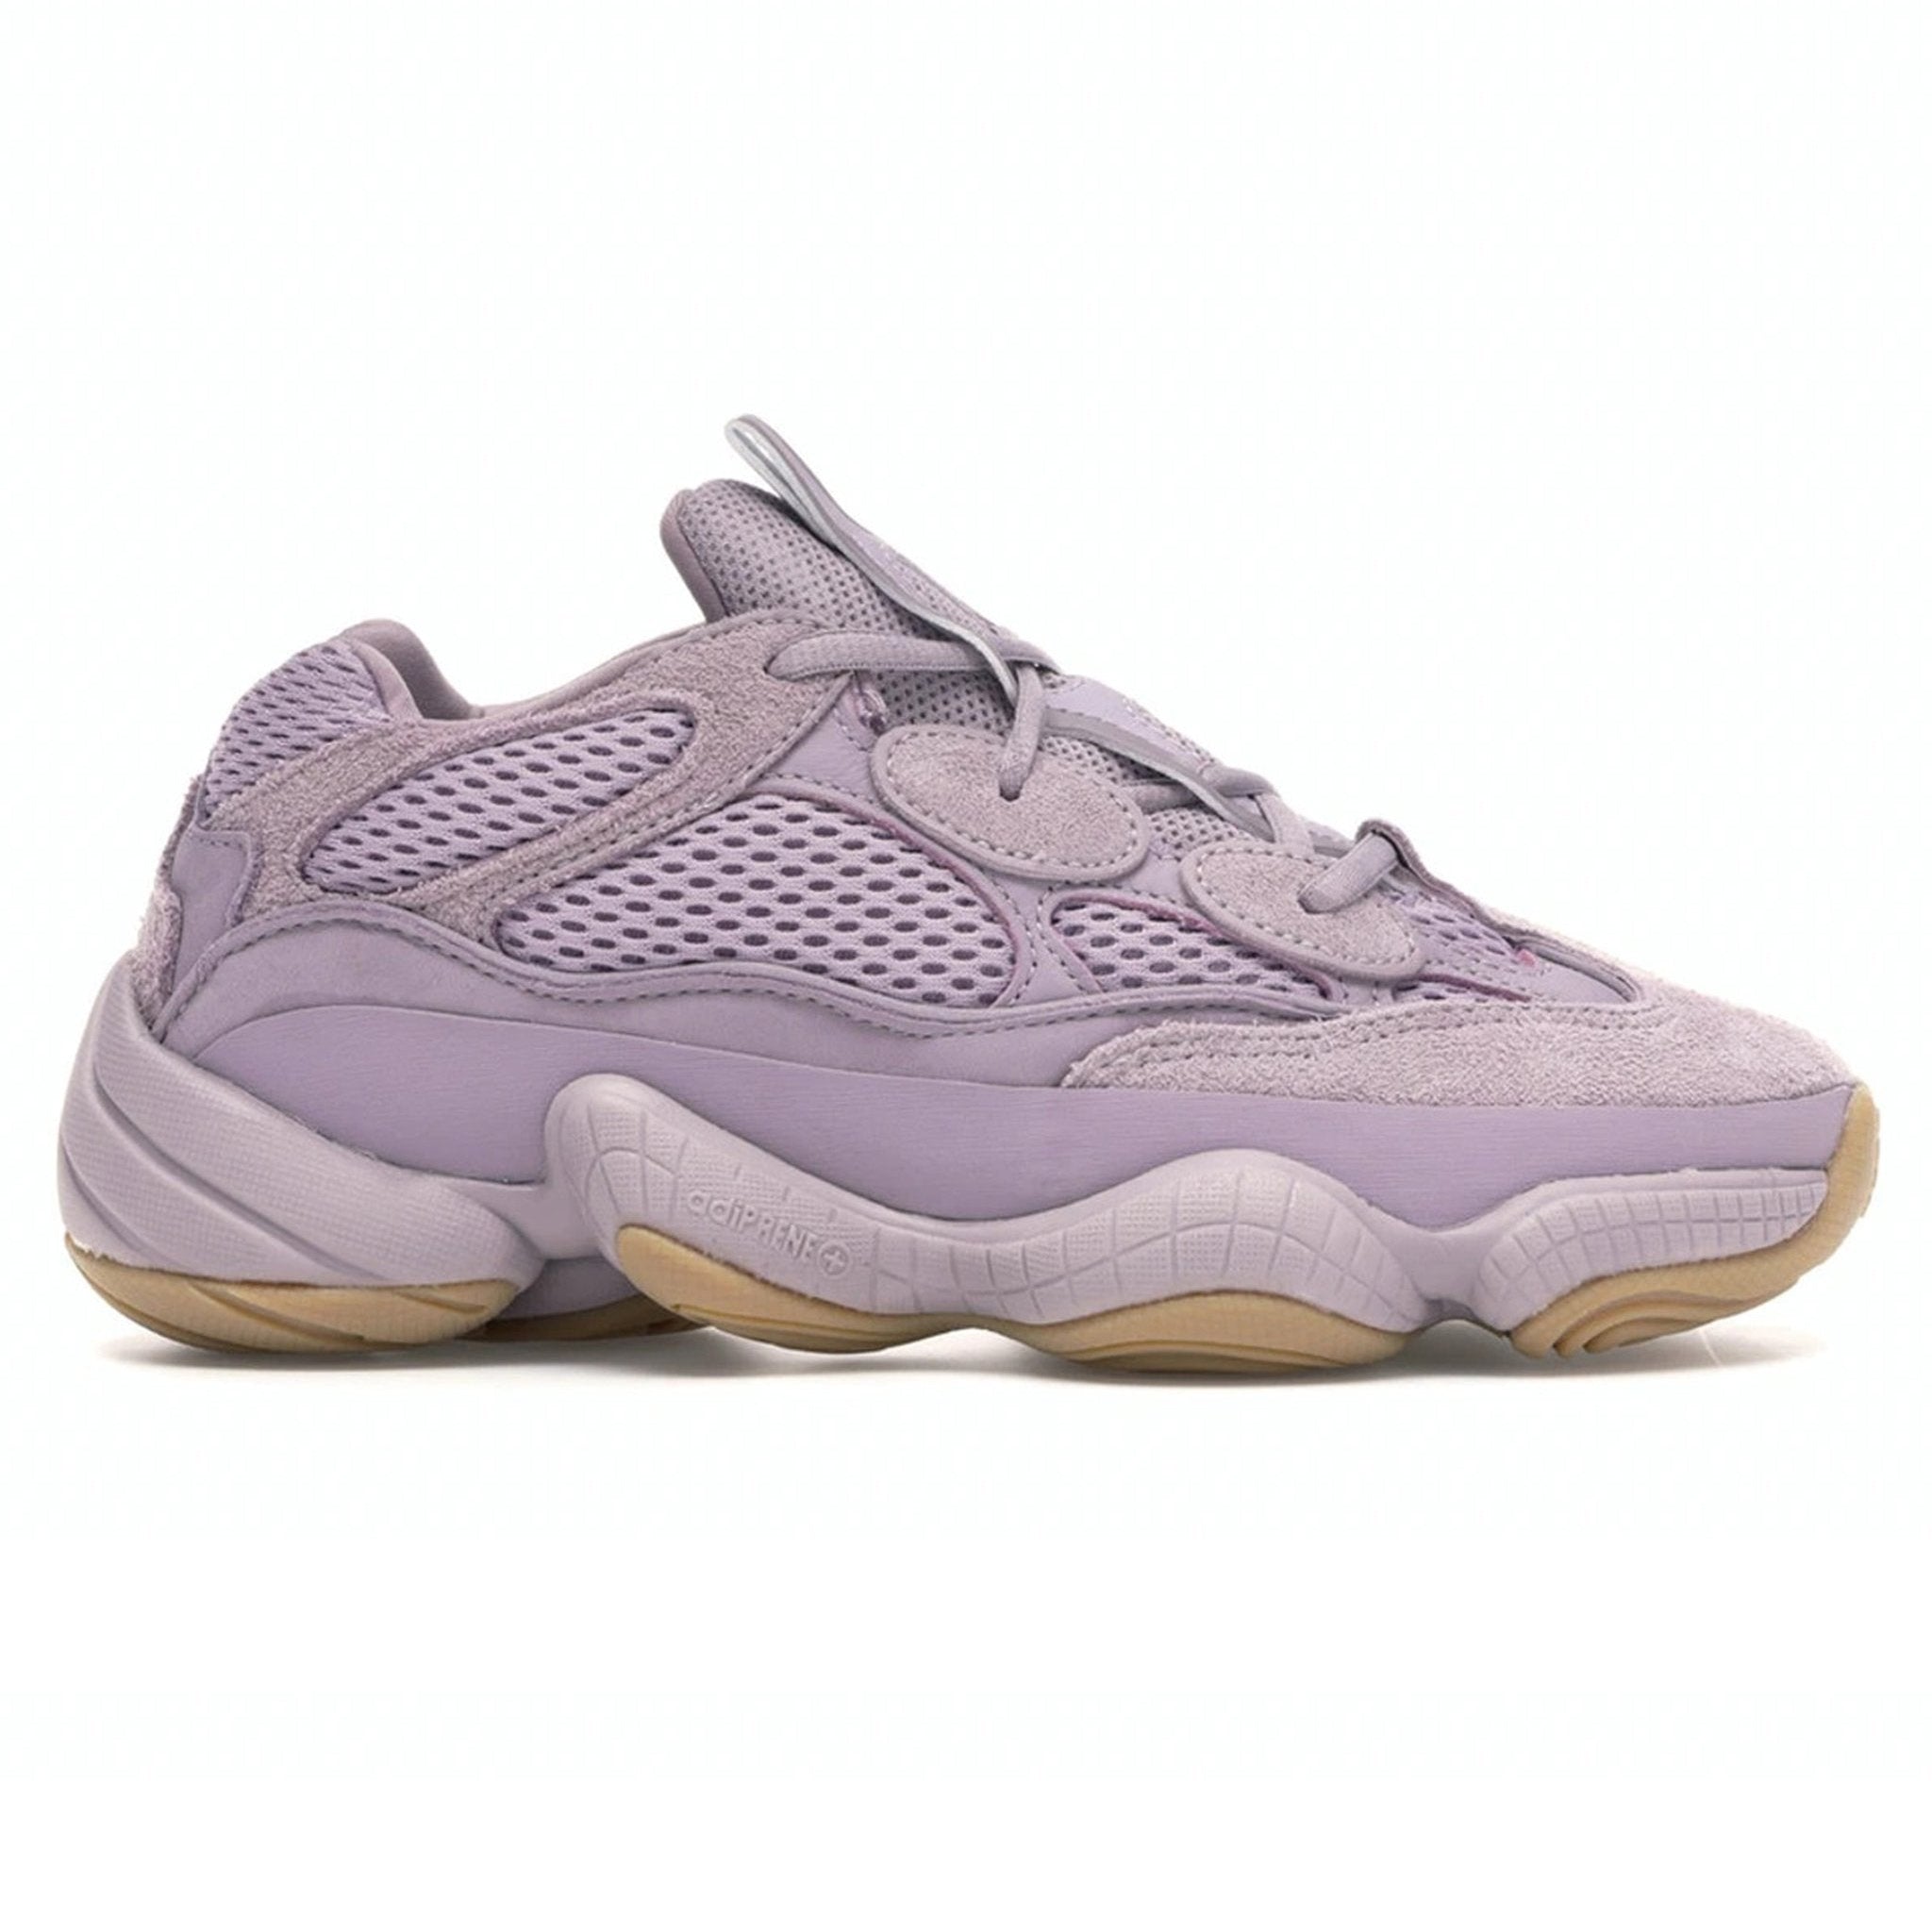 Image of Yeezy 500 Soft Vision